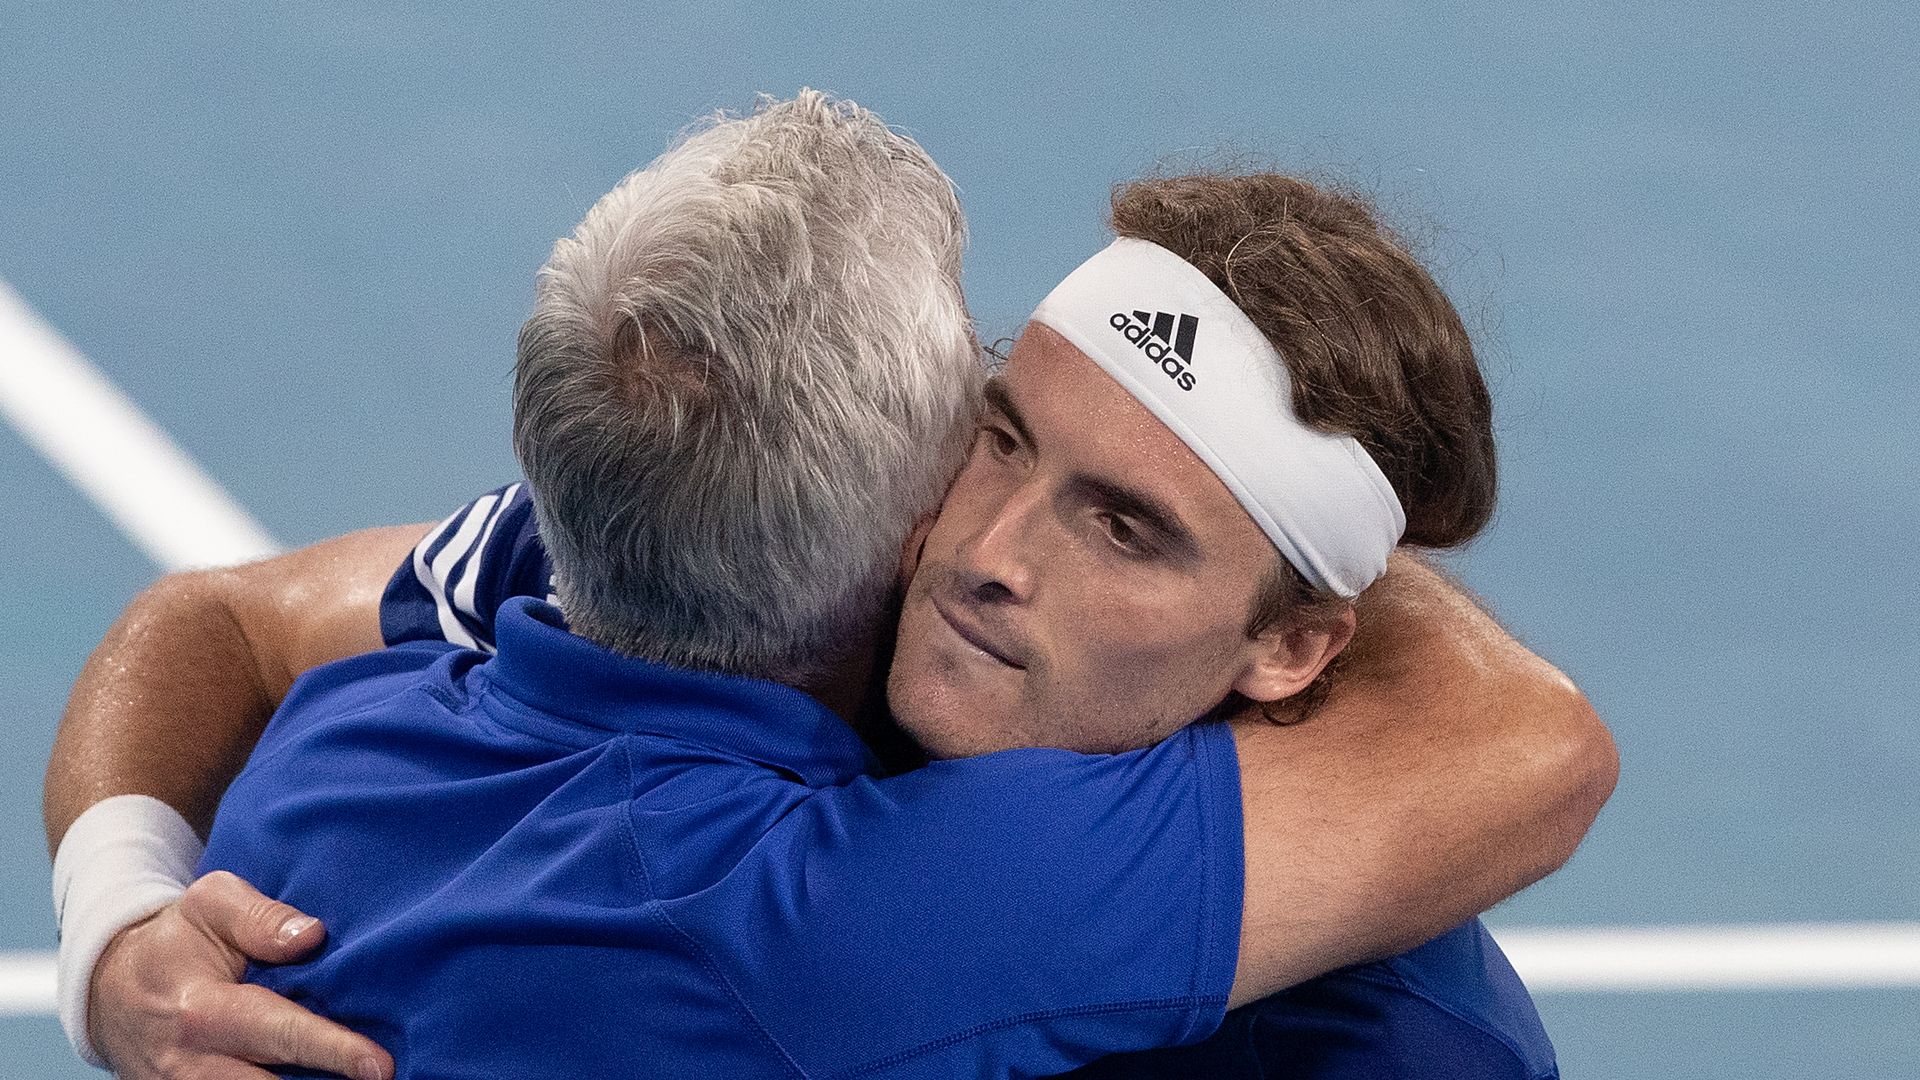 son and father hugging on tennis court